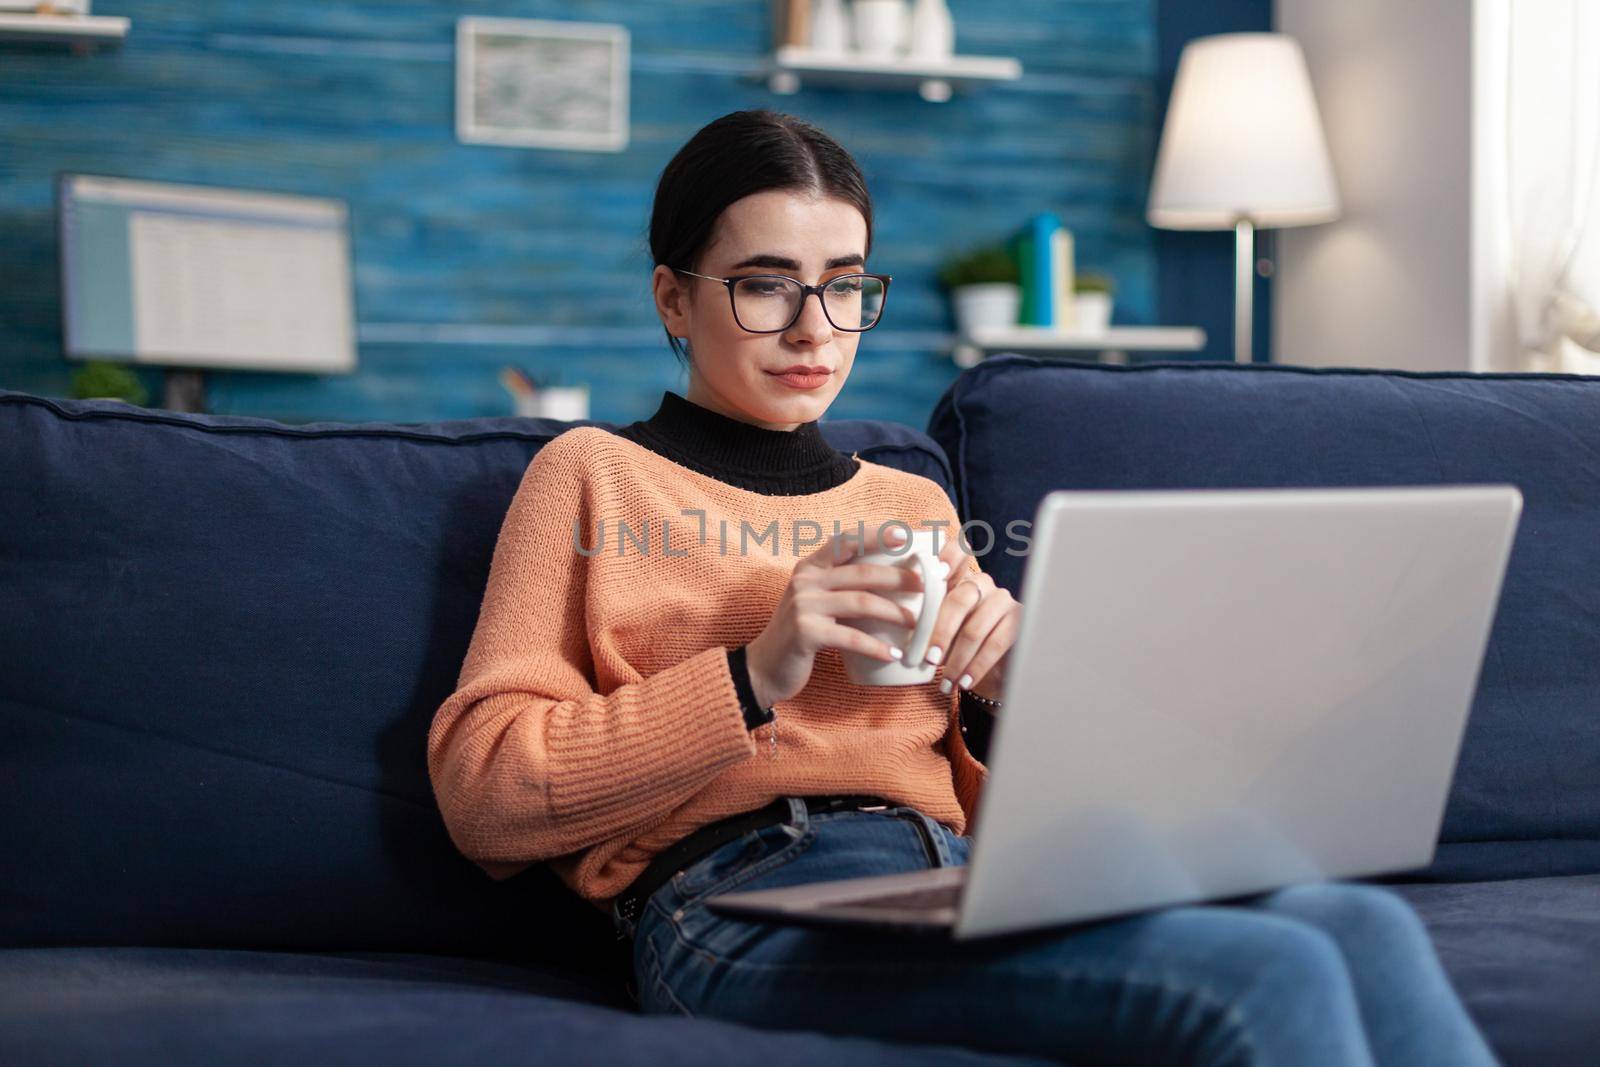 Student looking at laptop computer during online management courses sitting comfortable on sofa in living room. Woman reading marketing lesson on university platform, teenager studying at distance